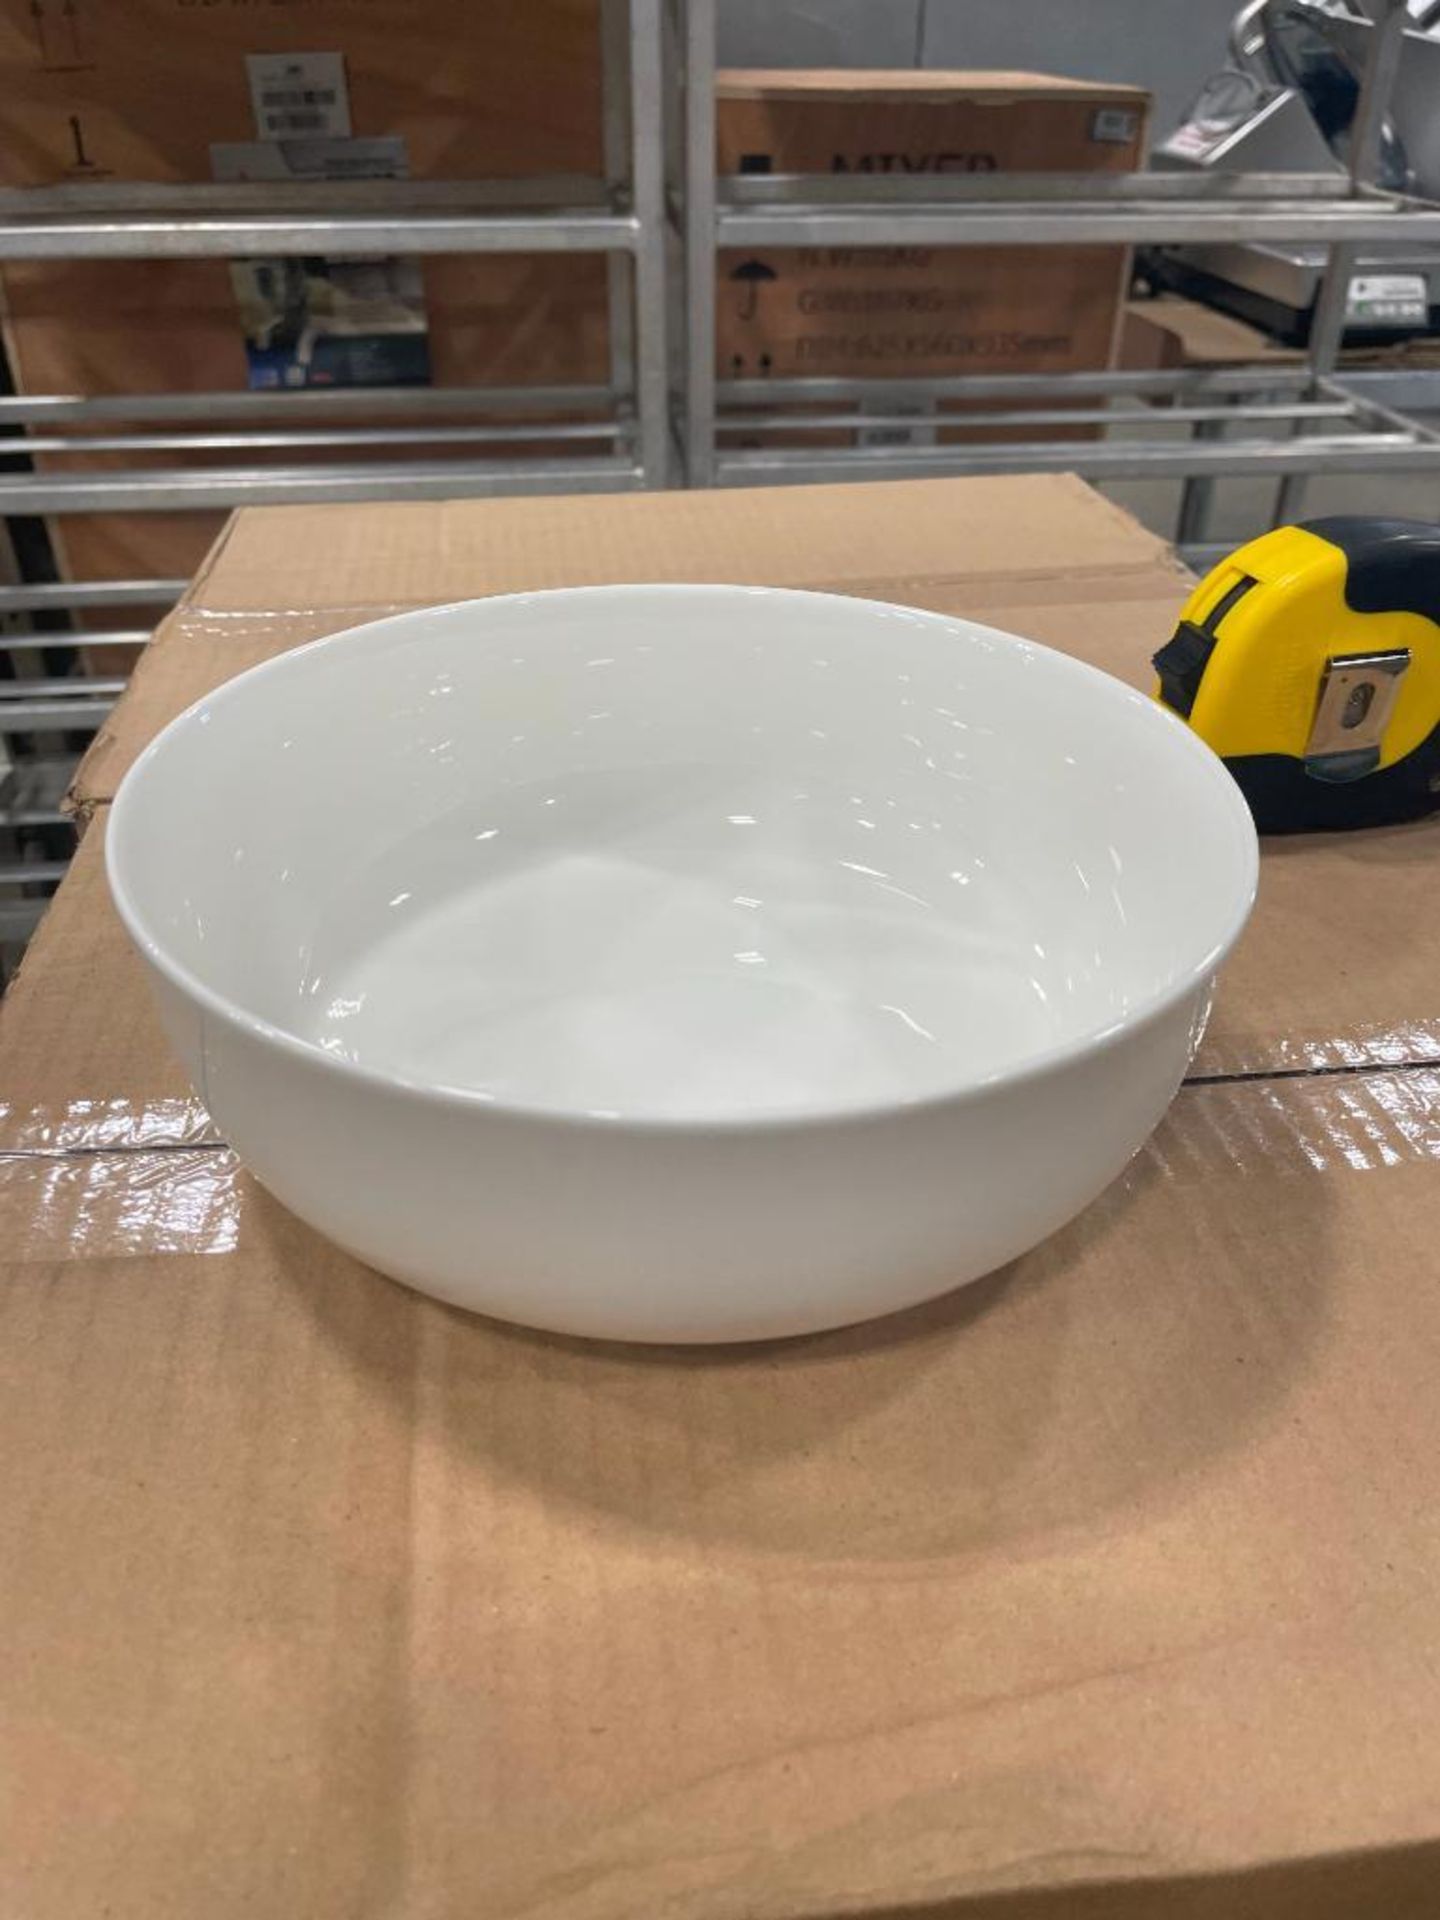 2 CASES OF 60OZ/1800ML WHITE PORCELAIN BOWLS, ARCOROC "EMBASSY" S0147 - LOT OF 32 - NEW - Image 2 of 6